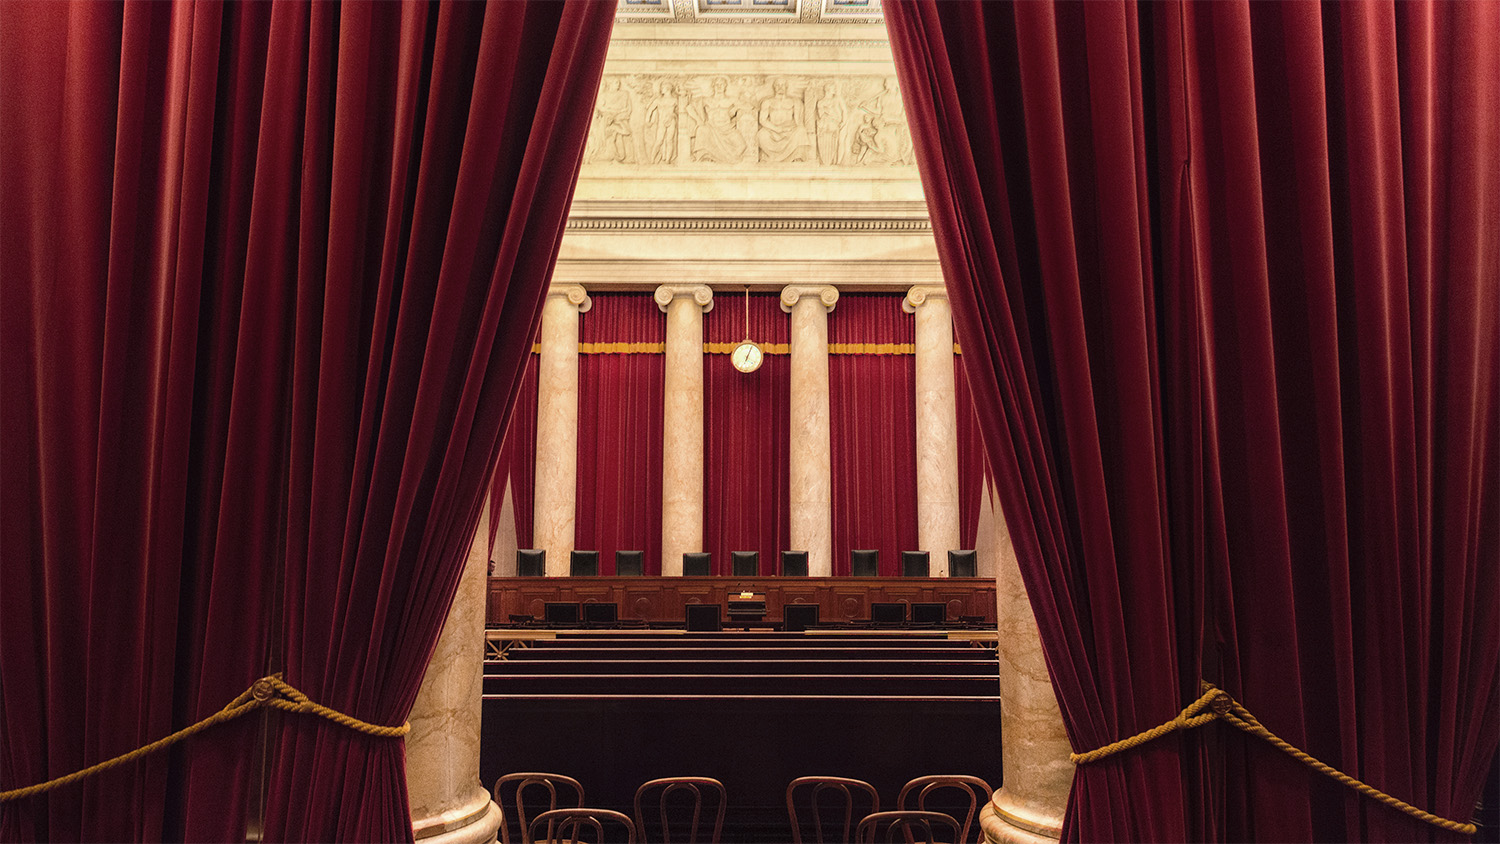 A view of the US Supreme Court Chambers from the back, with curtains mostly drawn.